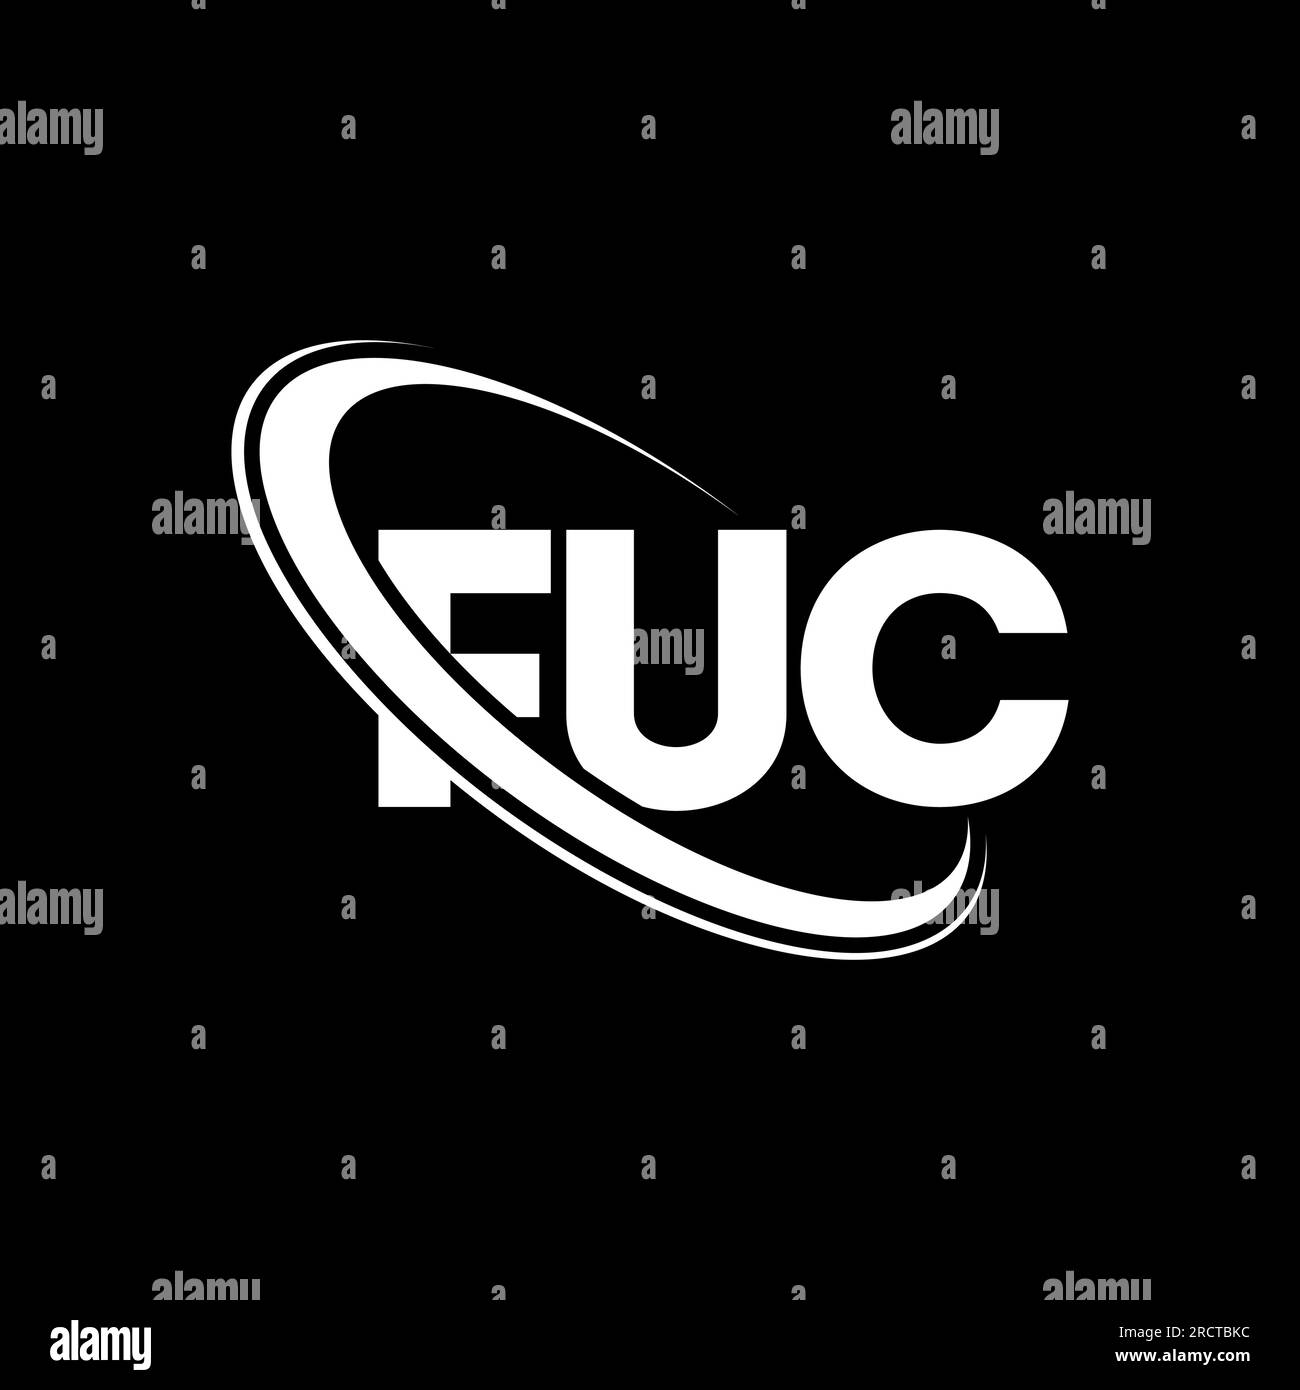 FUC logo. FUC letter. FUC letter logo design. Initials FUC logo linked with circle and uppercase monogram logo. FUC typography for technology, busines Stock Vector